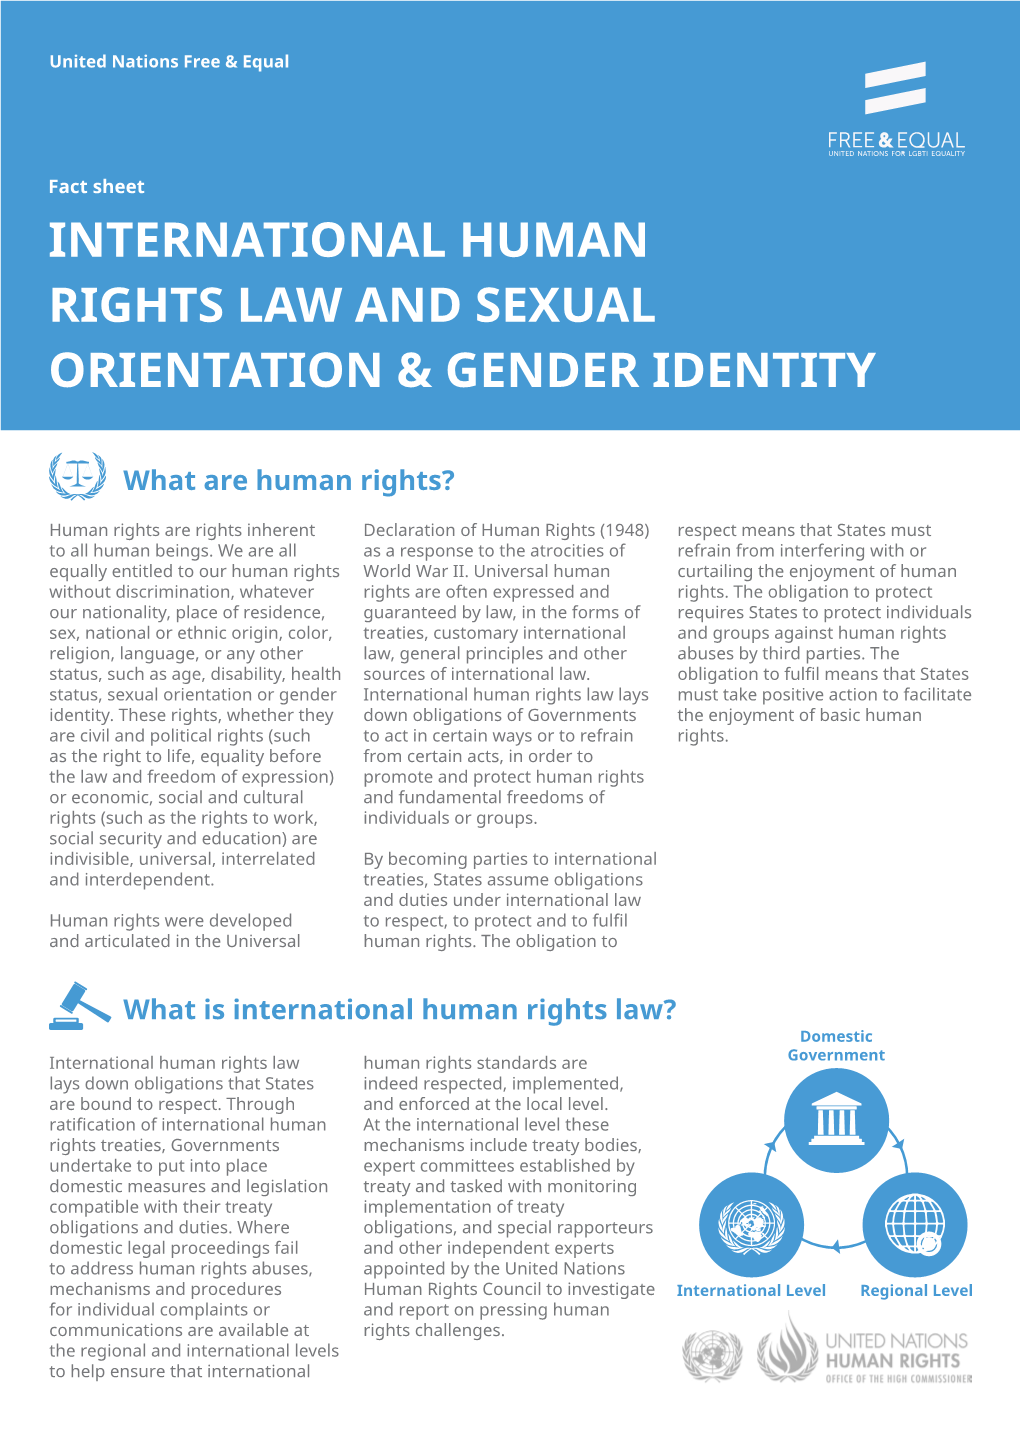 International Human Rights Law and Sexual Orientation & Gender Identity